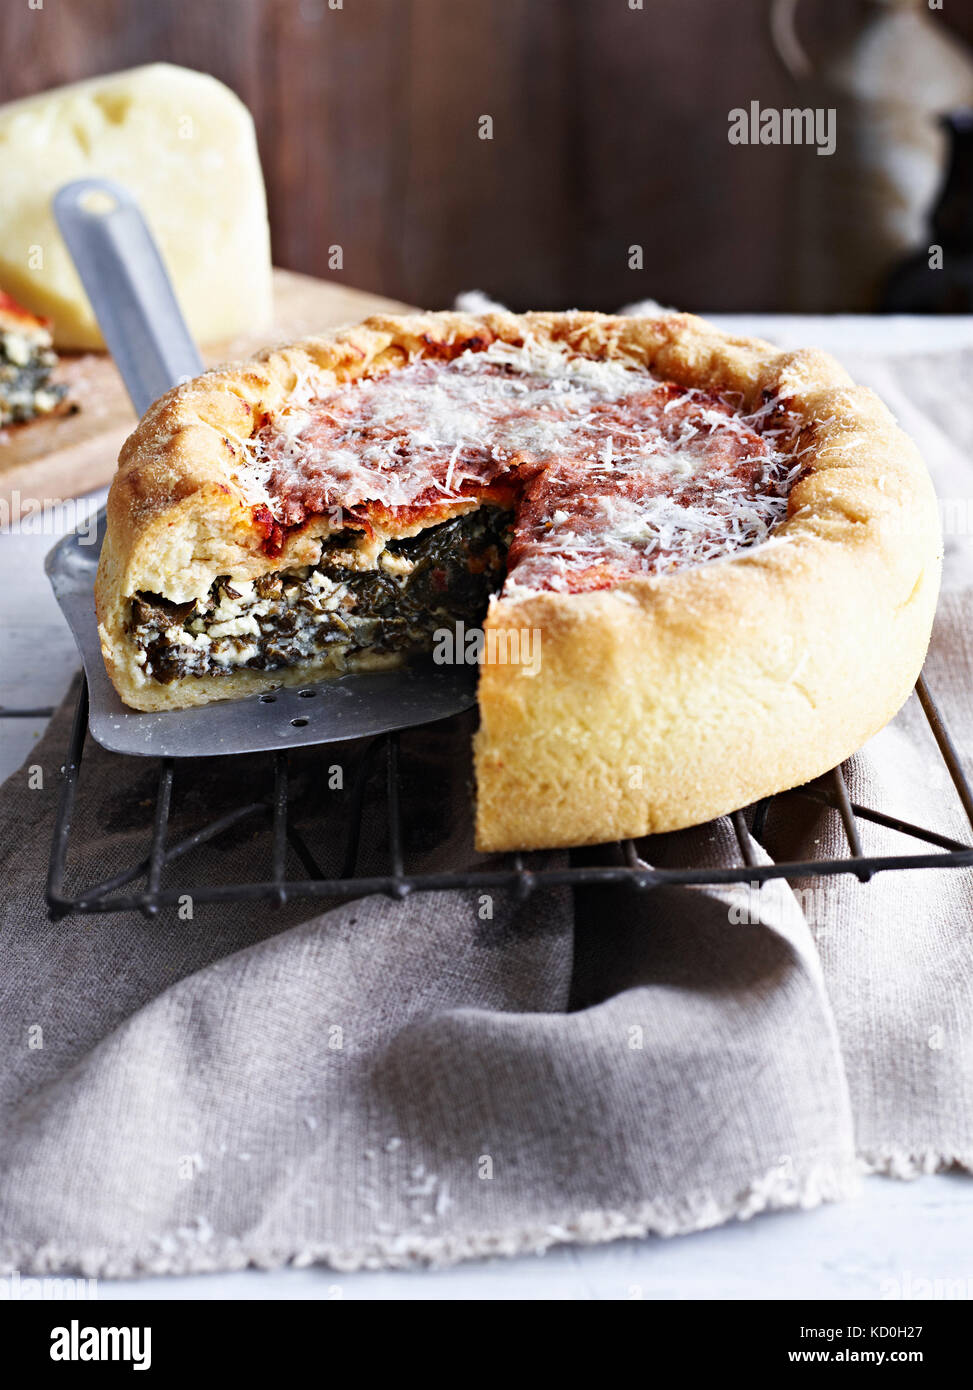 Chicago deep dish pizza, on cooling rack, close-up Stock Photo - Alamy